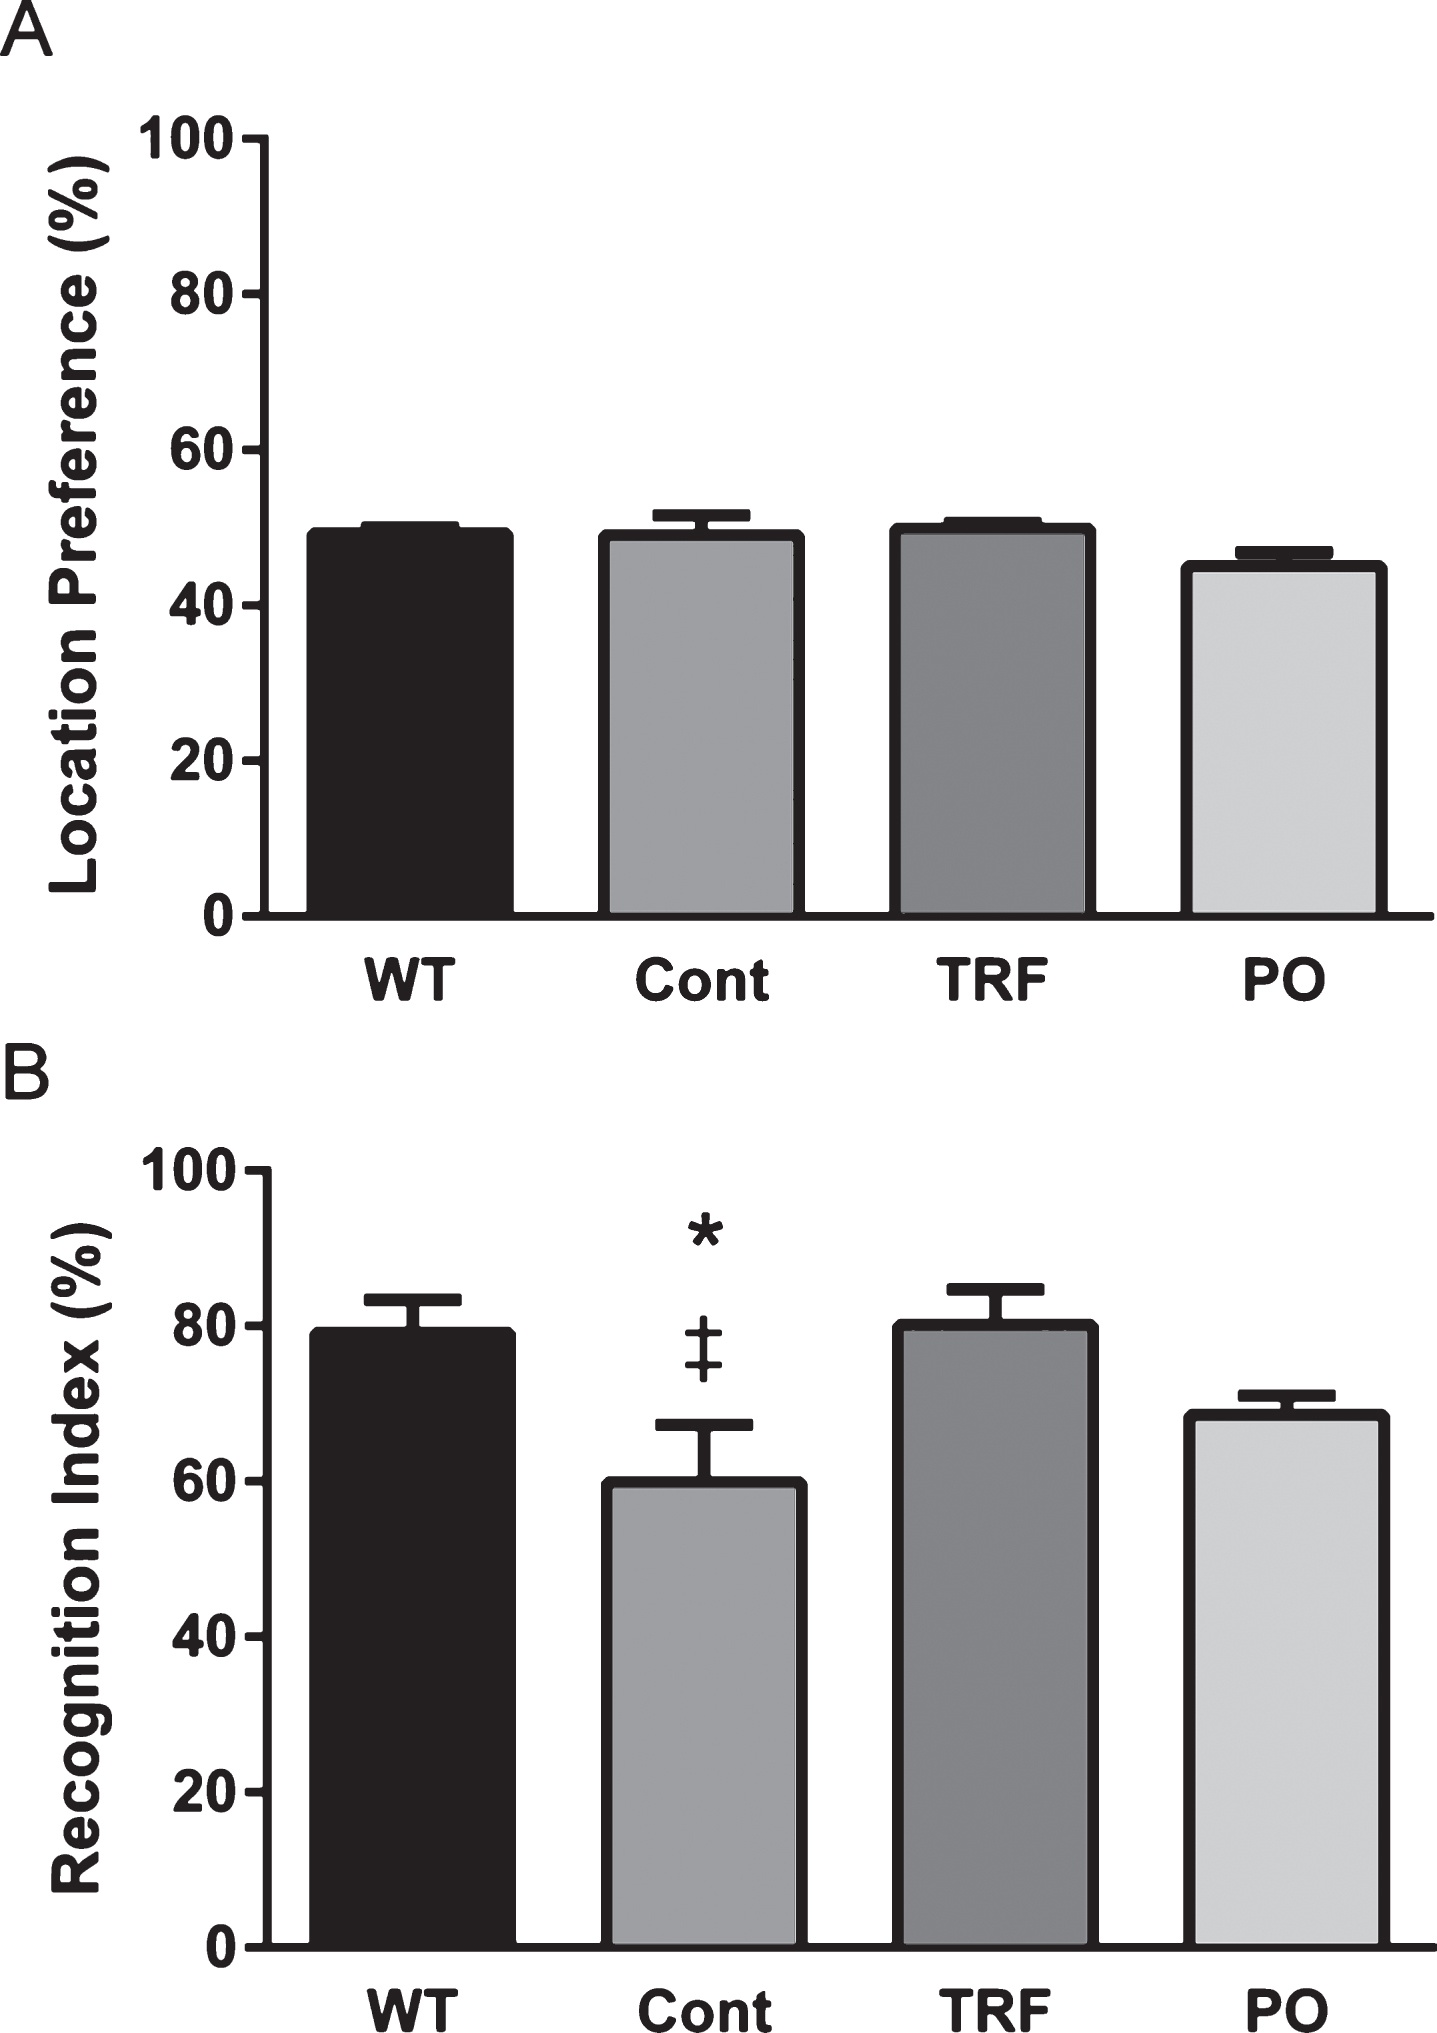 Supplementation with tocotrienol-rich fraction (TRF) prevents cognitive deficits in AβPP/PS1 mice as measured by the novel object recognition test. Four days before sacrifice, wild-type mice (WT; n = 13) and AβPP/PS1 mice supplemented daily with water (Cont; n = 9), TRF (n = 11), or palm oil stripped of vitamin E (PO; n = 10) for 10 months were subjected to the novel object recognition test. A) All groups spent approximately equal time exploring the two identical objects during the training trial, indicating no inherent place preference. B) Control mice exhibited a significantly lower recognition index compared with WT mice, while TRF rescued recognition index to the WT level. Data represent mean±S.E.M. Significance (Bonferroni post hoc test after analysis of variance): ‡p < 0.05 versus WT mice; *p < 0.05 versus TRF-supplemented mice.